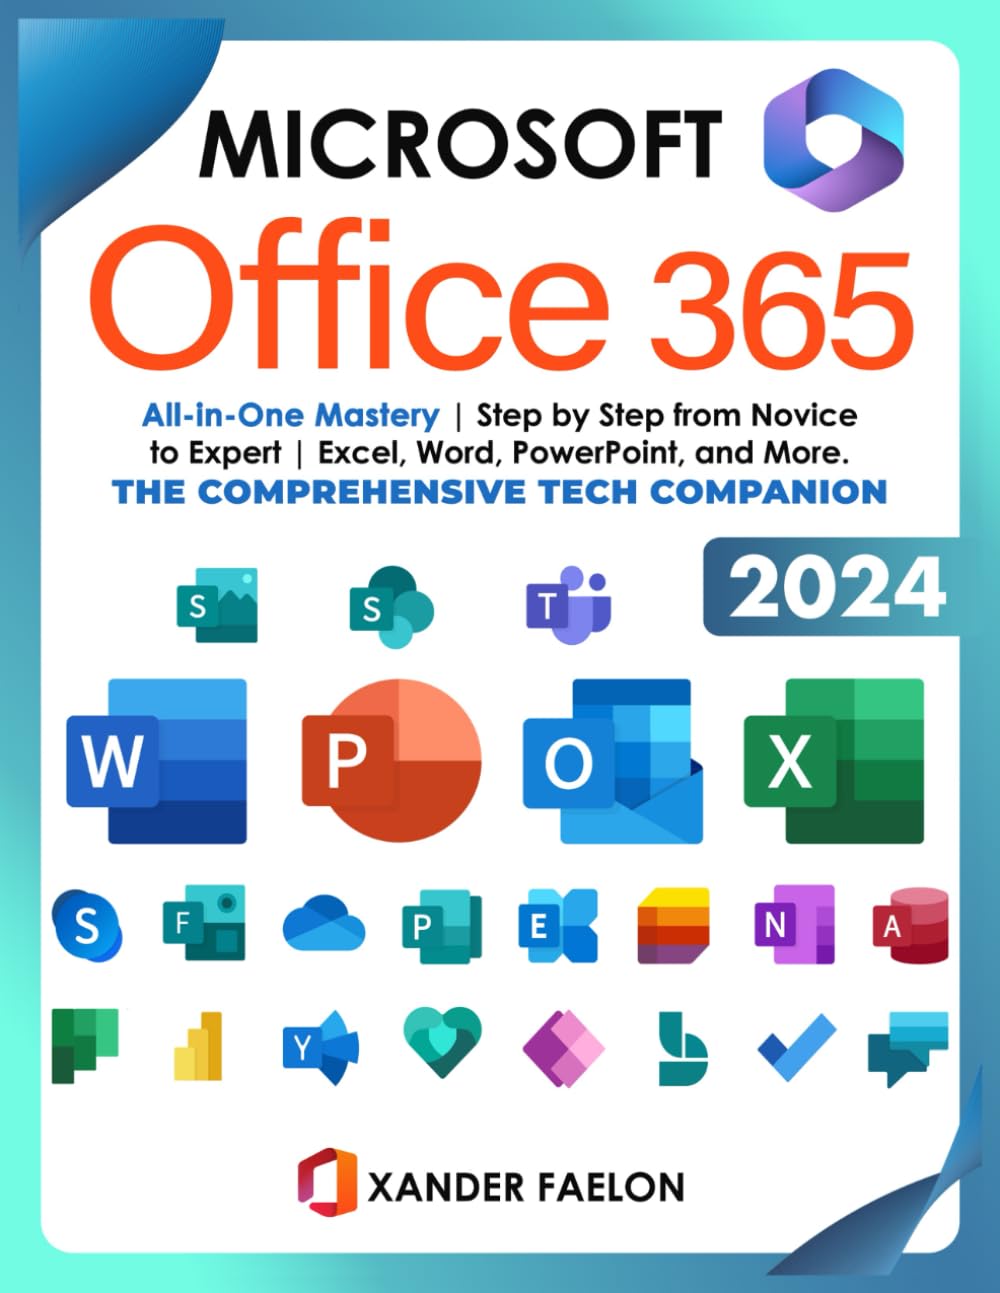 Microsoft Office 365 Bible: Complete Command | Step by Step from Novice to Expert | Excel, Word, PowerPoint, and More |The Comprehensive Tech Companion